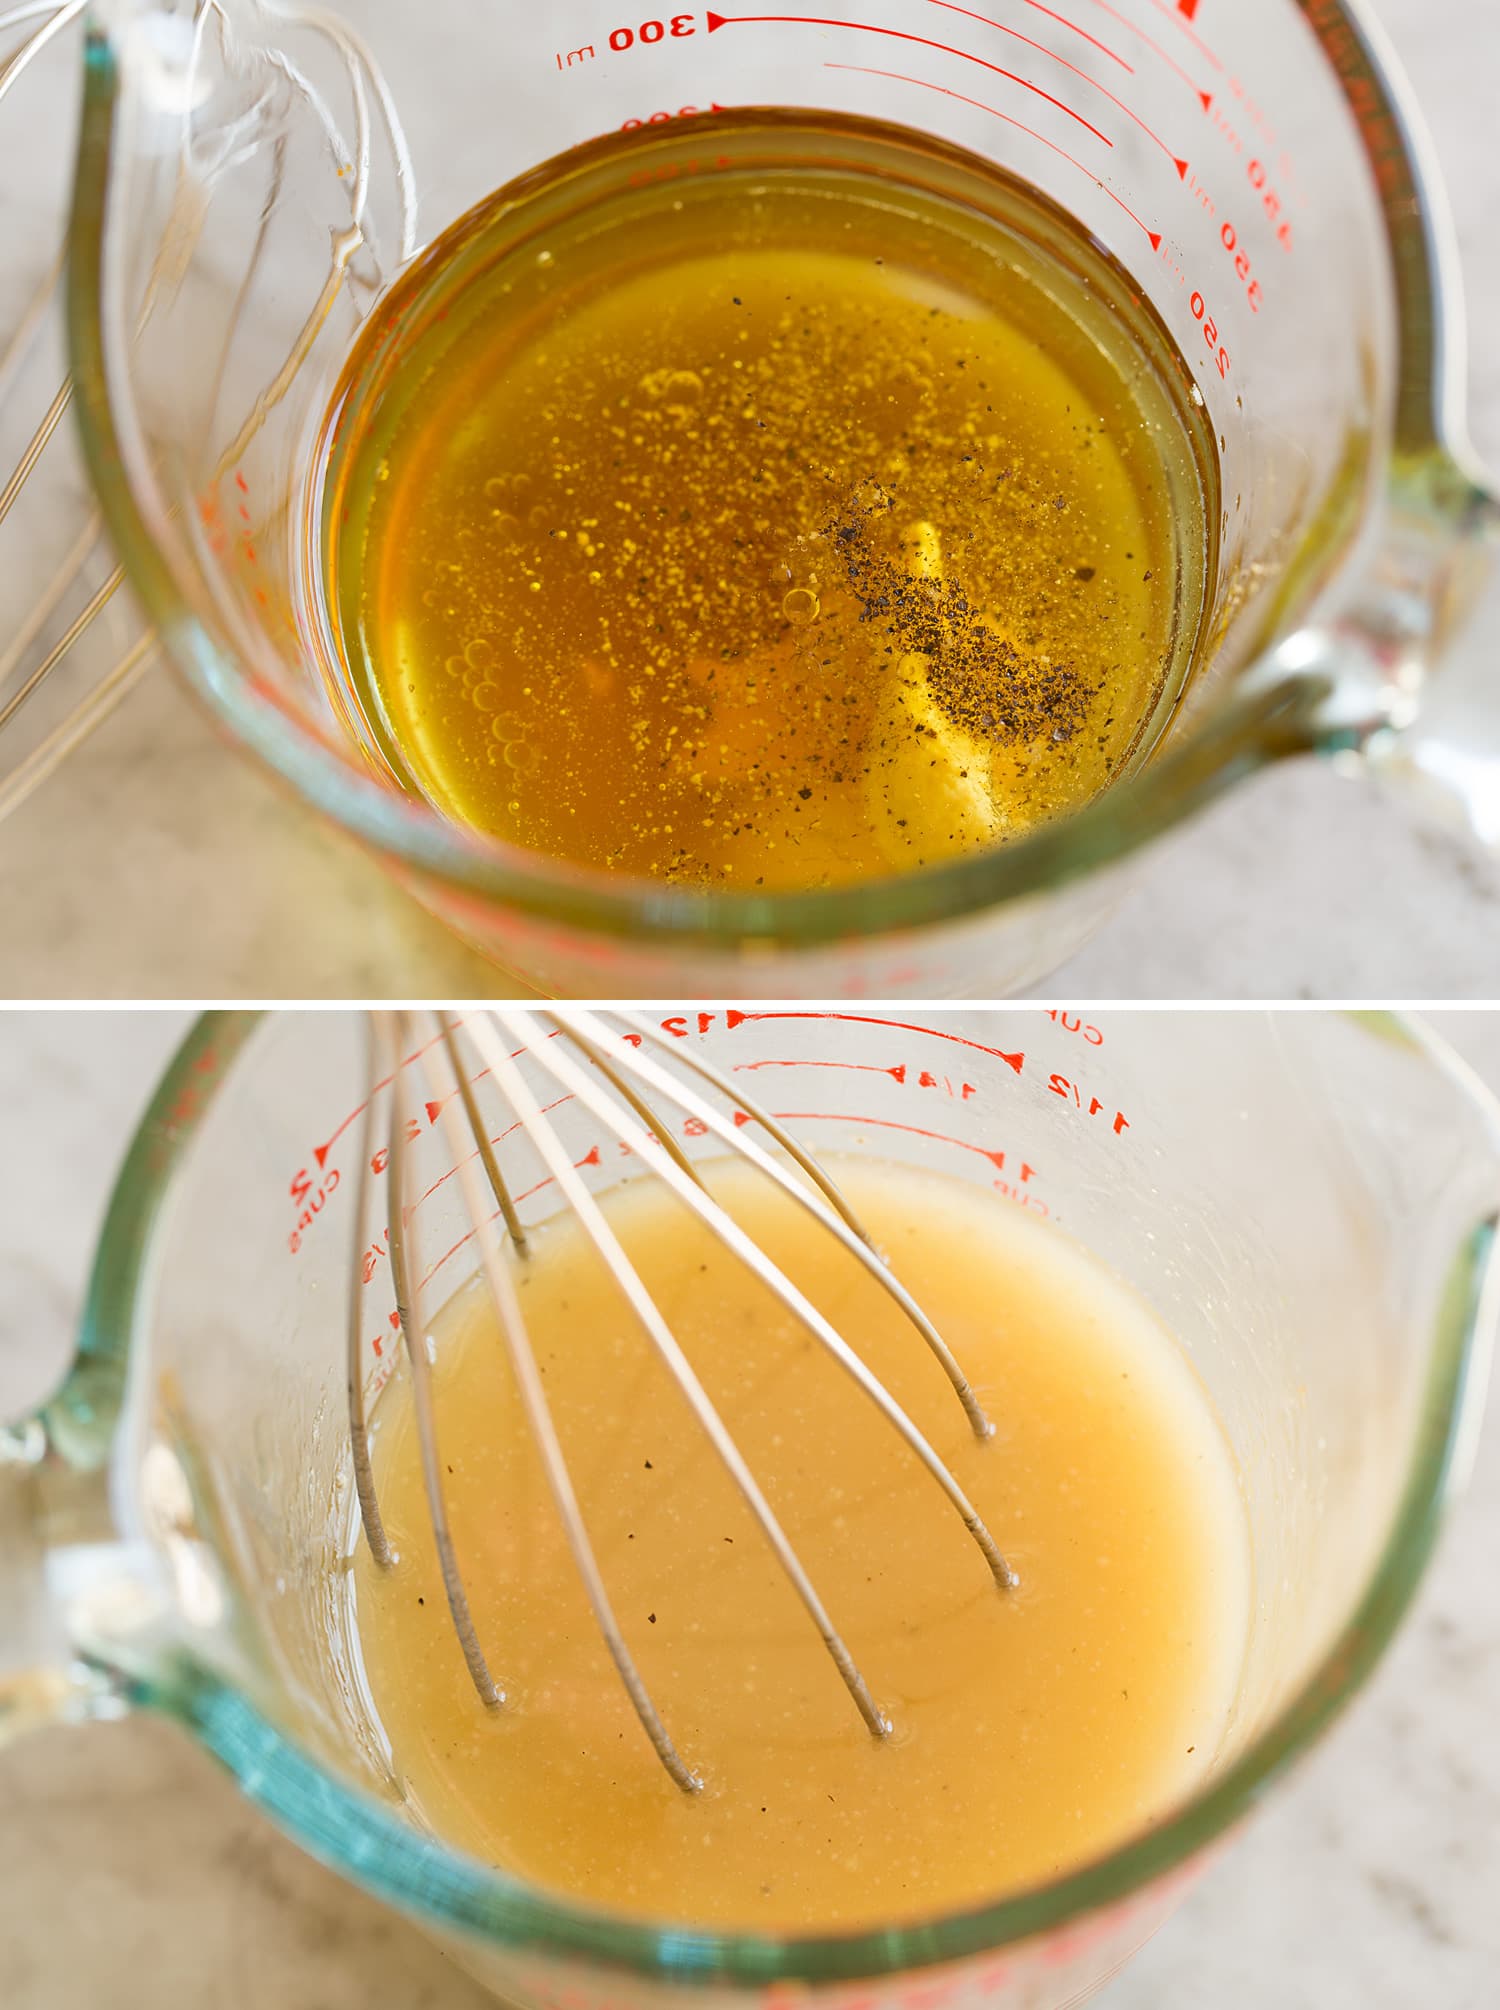 Vinaigrette dressing before and after mixing in glass cup.